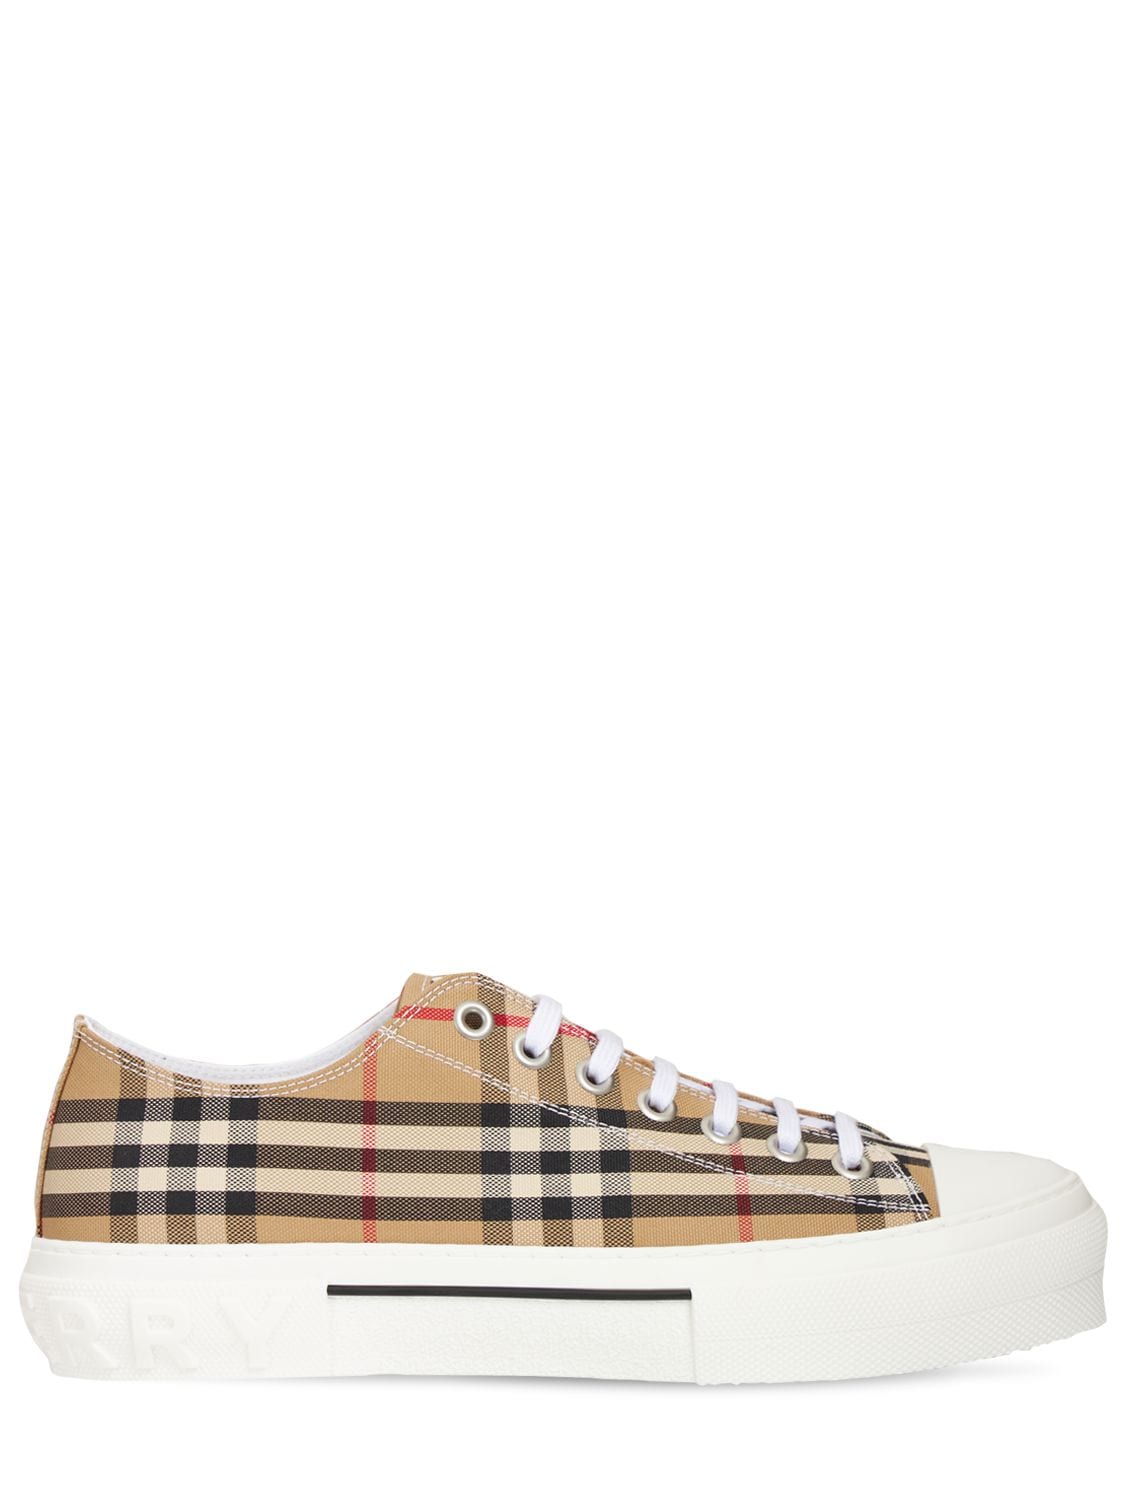 Image of Jack Canvas Check Low Sneakers